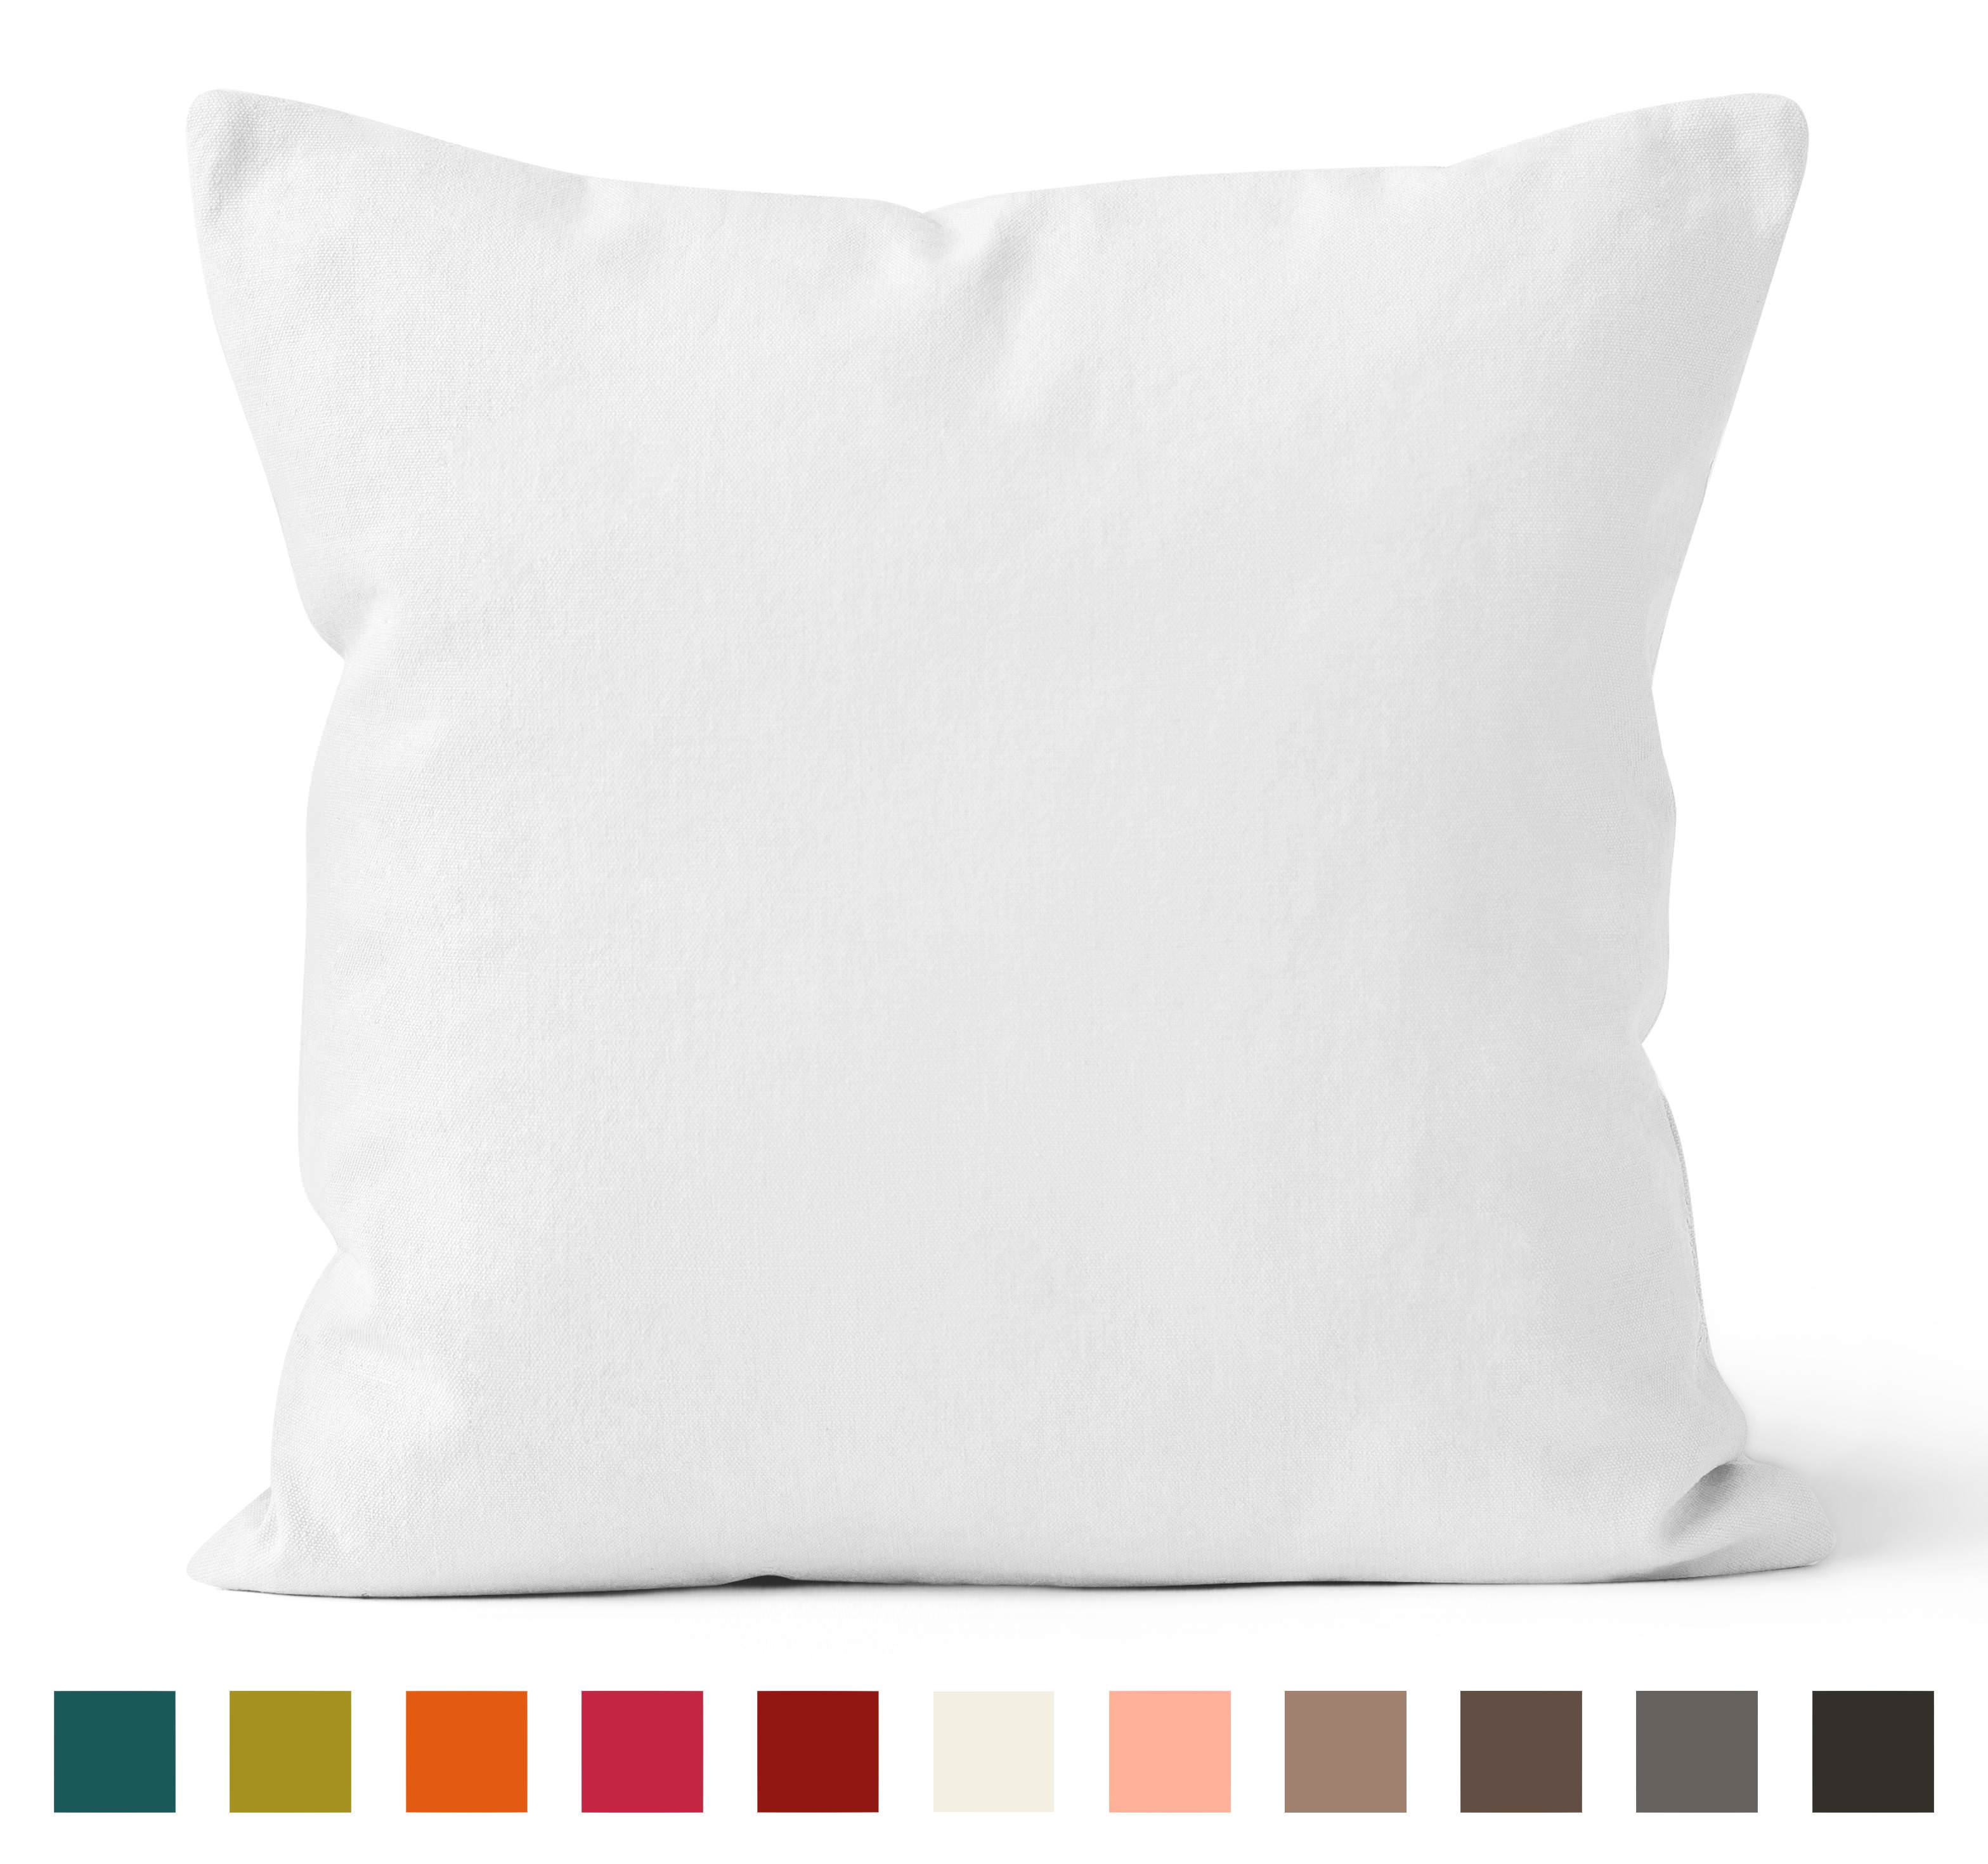 Encasa Homes Dyed Cotton Canvas Cushion Cover (Choose with or without fillers) - 30x30 cm, White